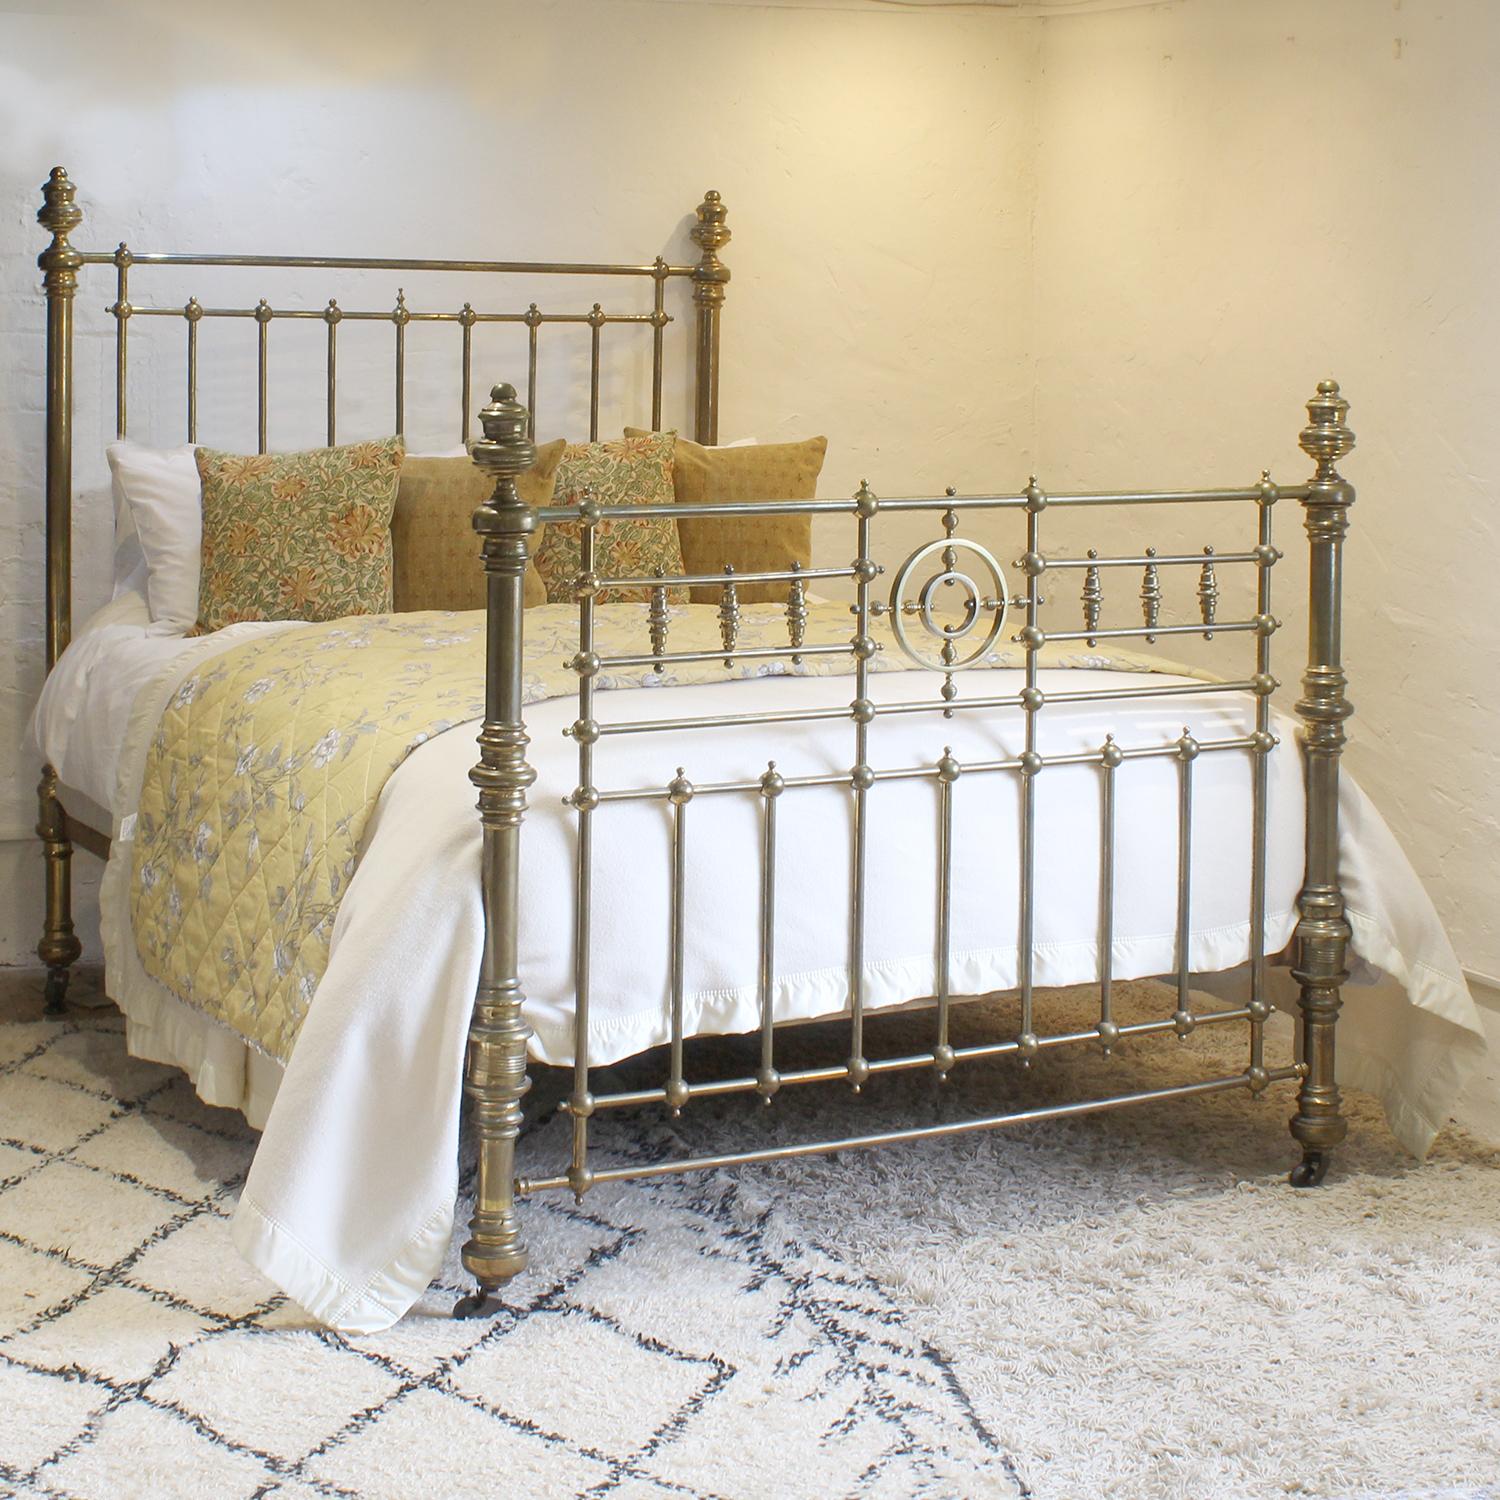 A magnificent all brass Victorian antique bed with decorative foot panel, featuring trumpets and concentric rings, and decorative fittings.
This bed has its original lacquer, which has faded in places. We can repolish the brass if necessary and even